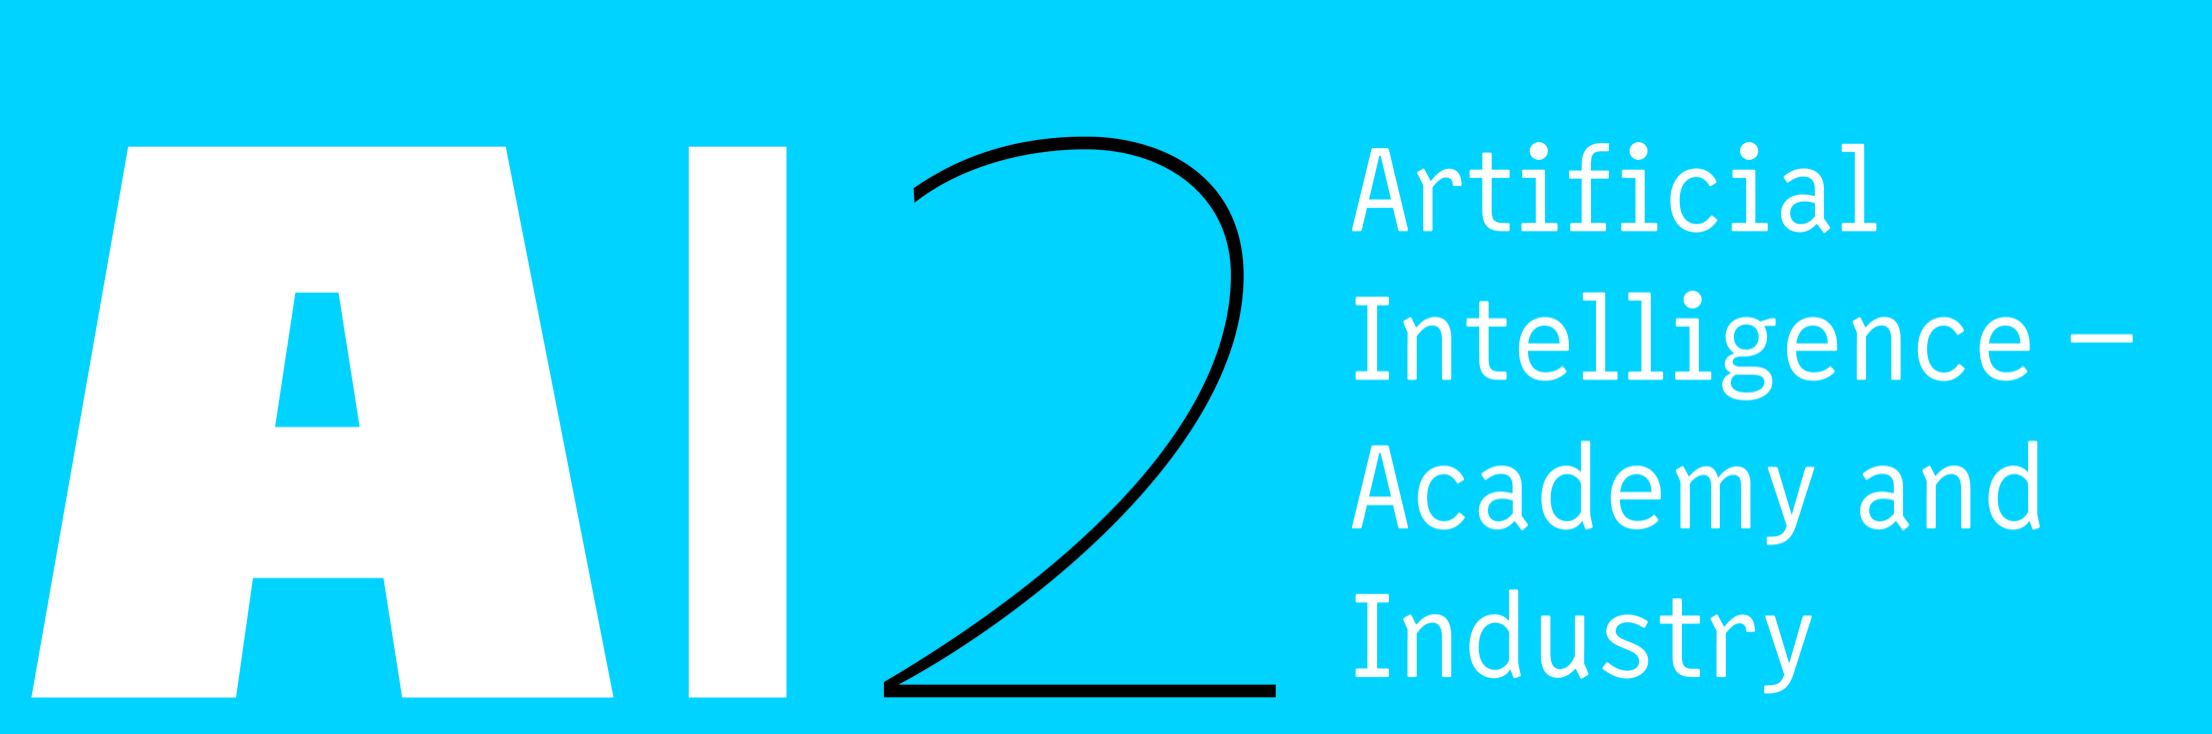 AI2 | Artificial Intelligence - Academy and Industry